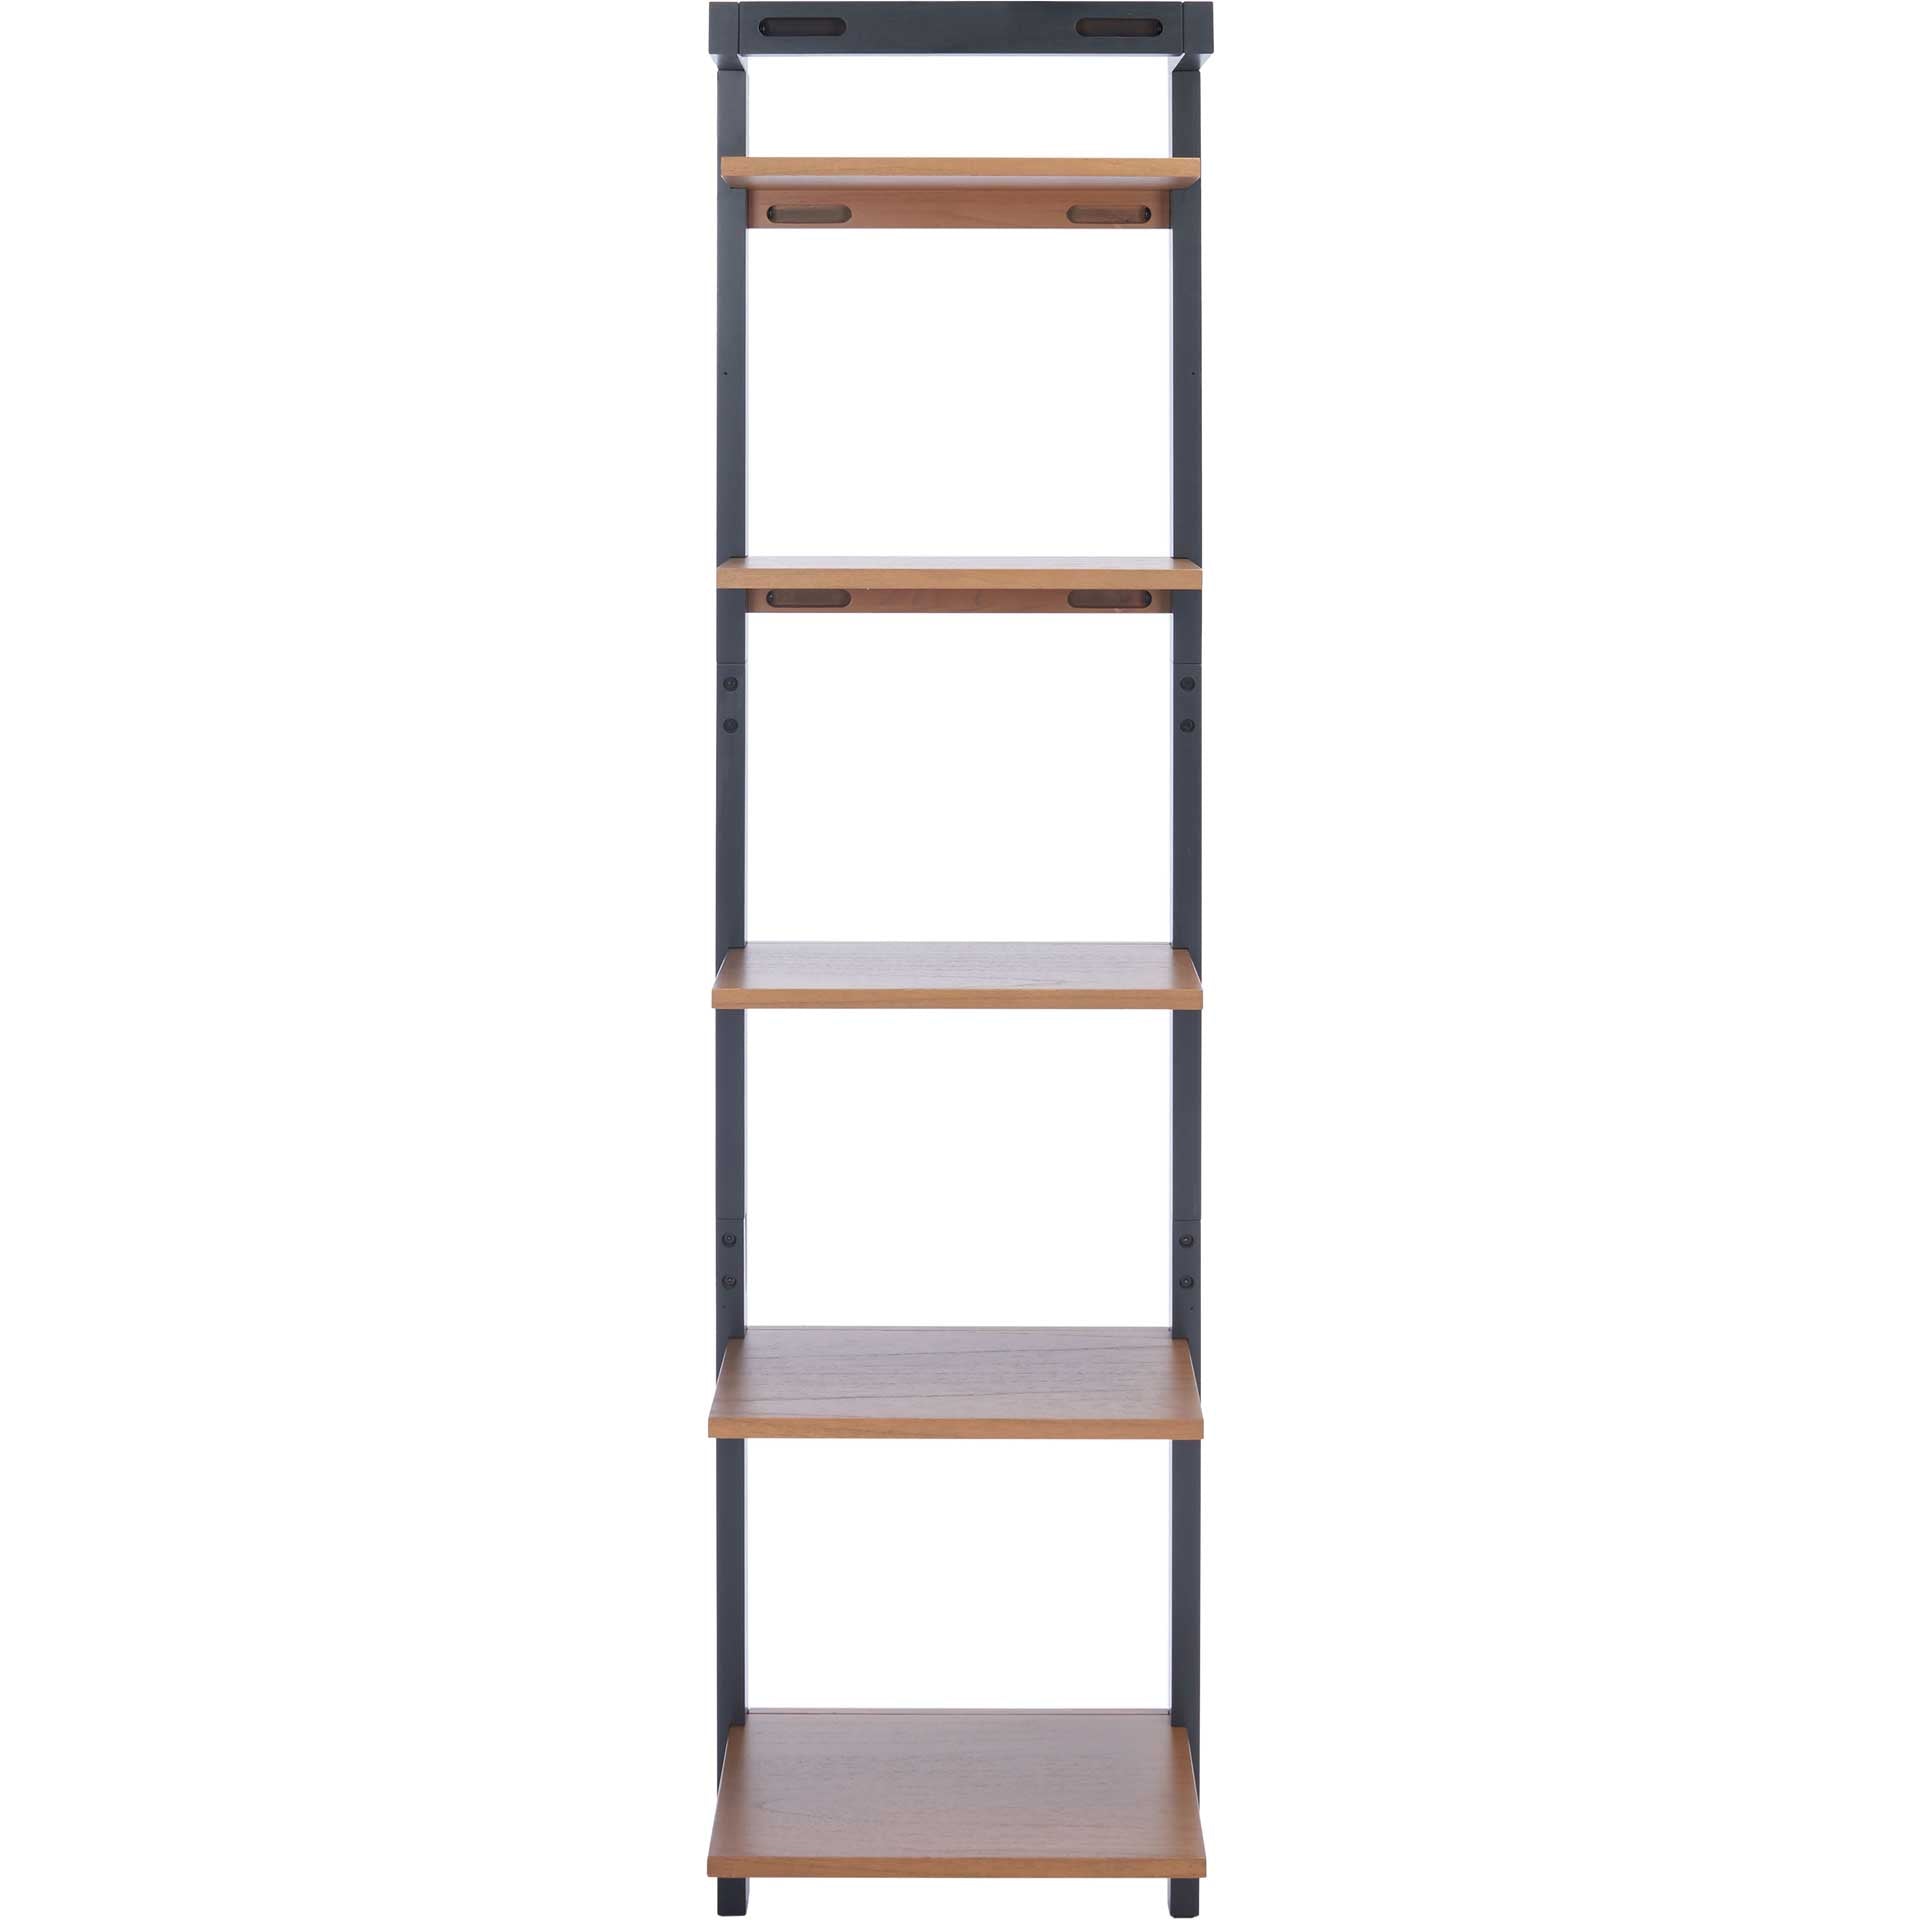 Yara 5 Tier Leaning Etagere Natural/Charcoal